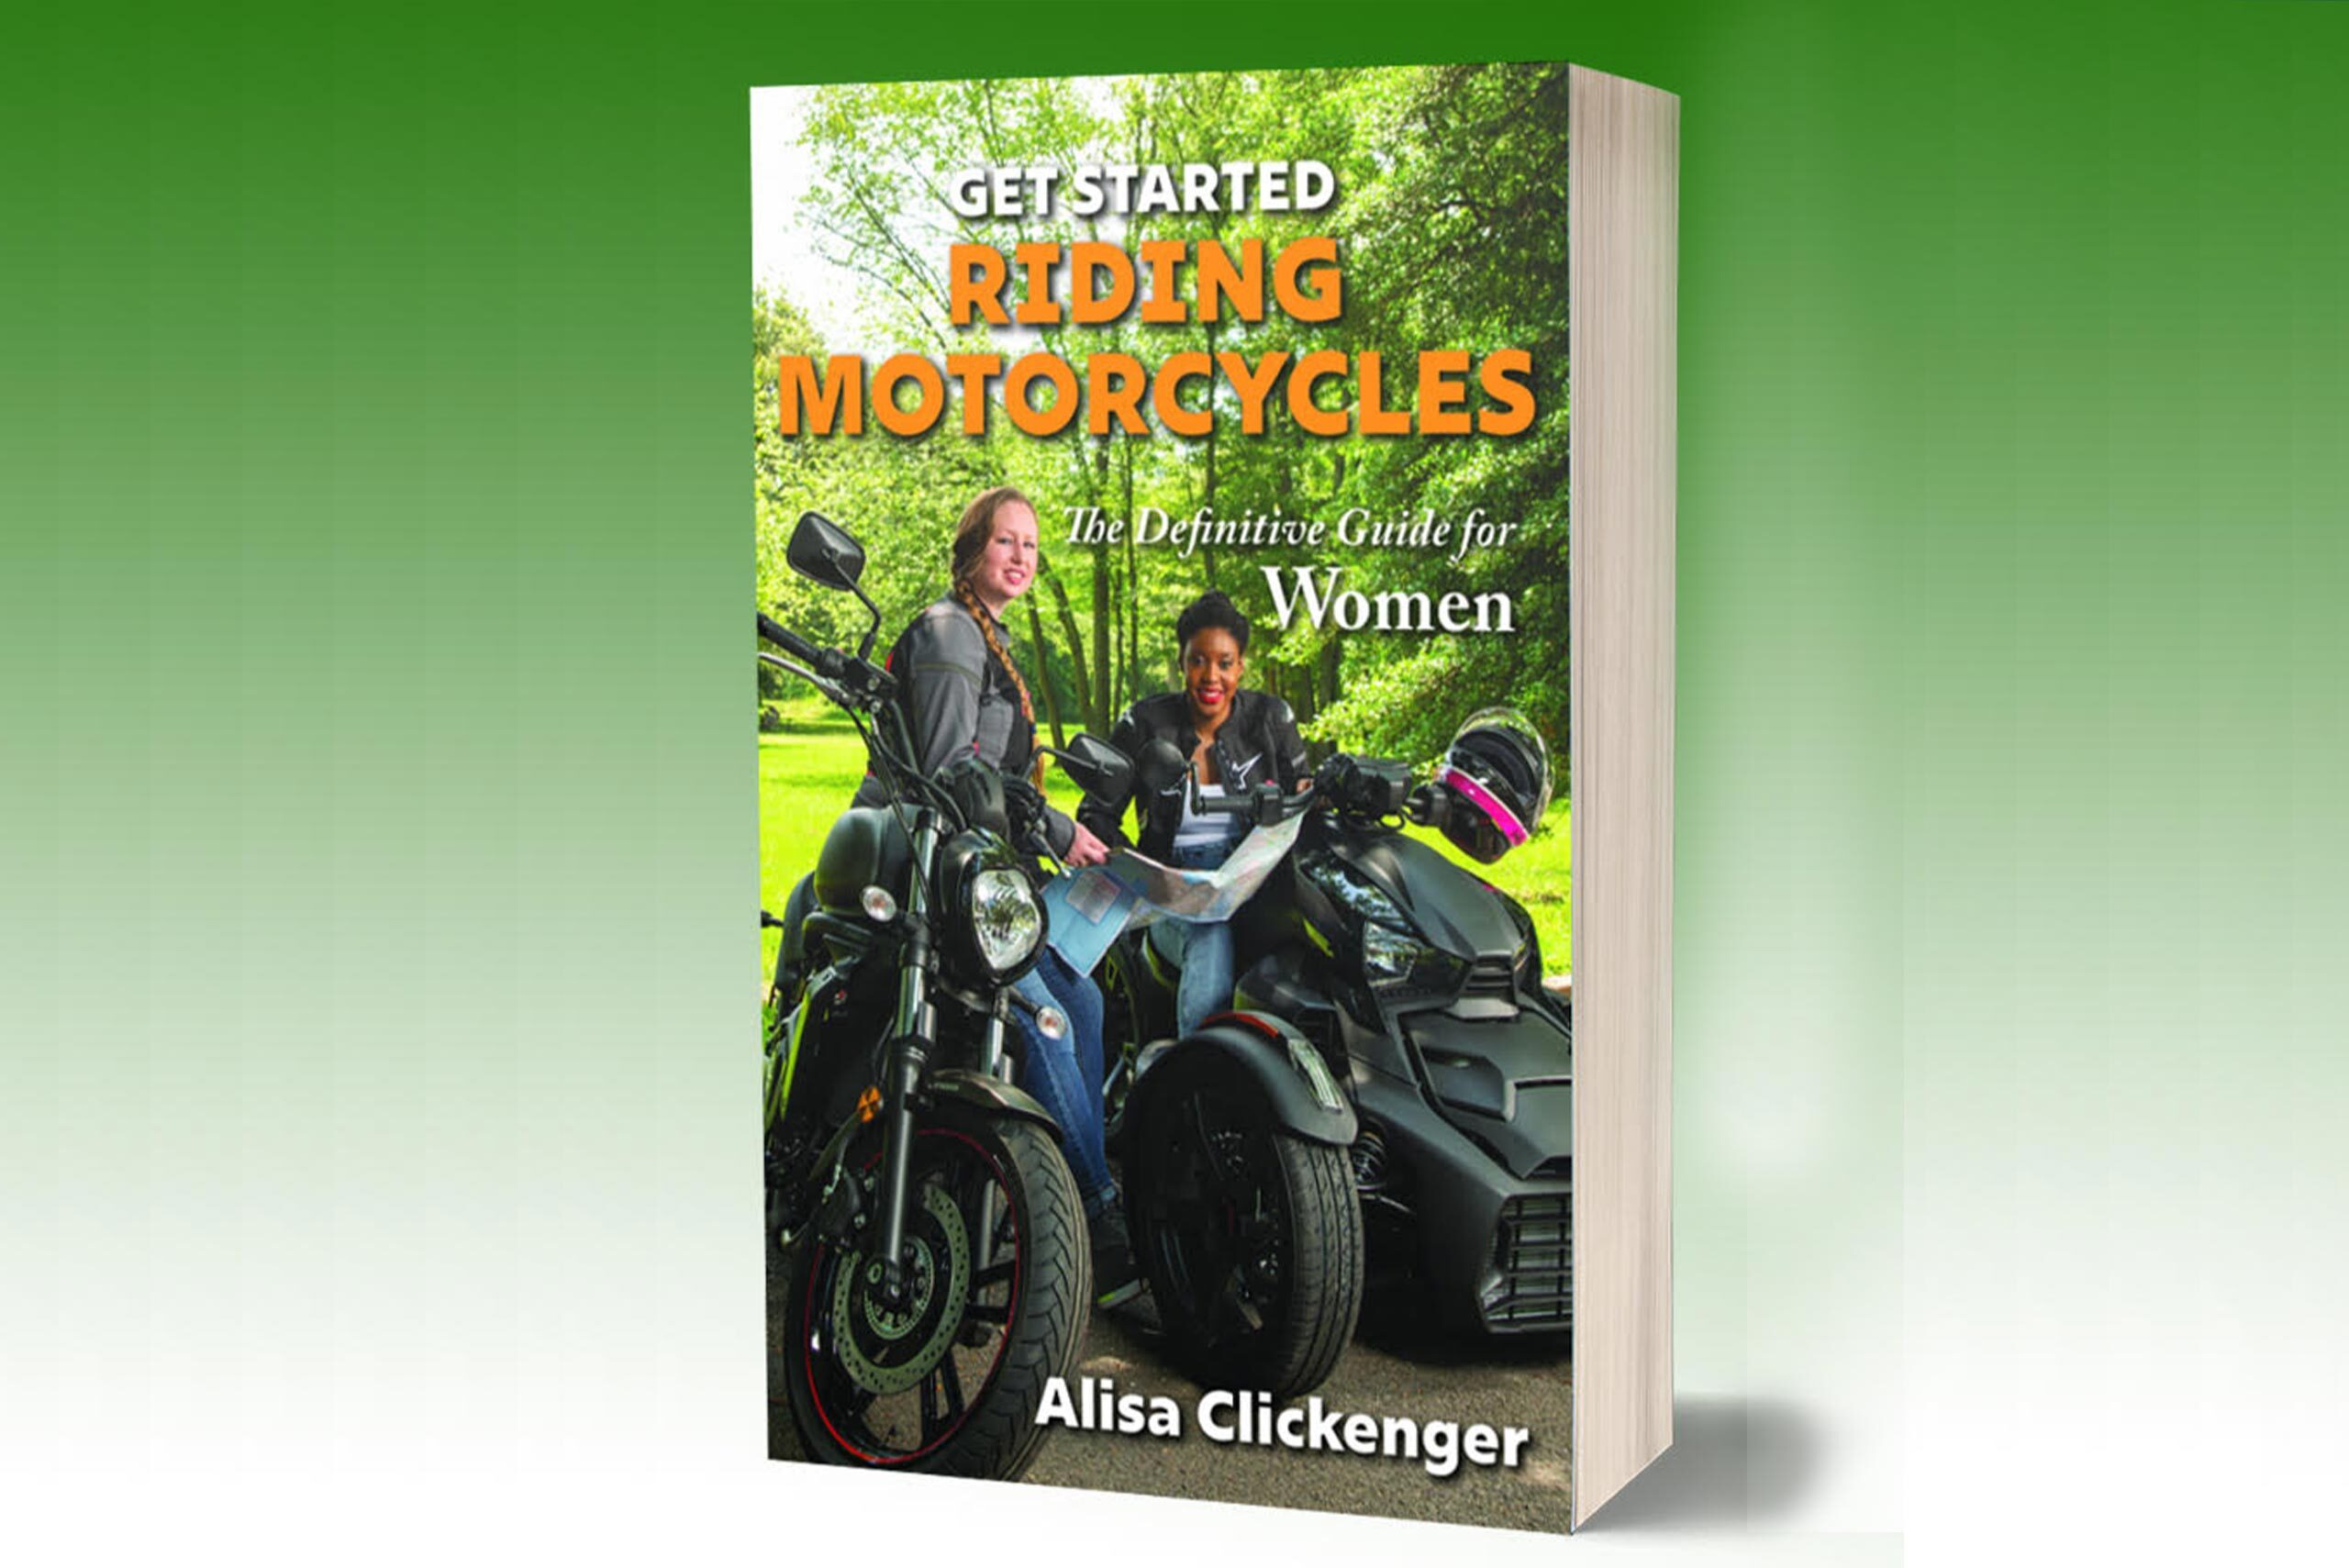 Get Started Riding Motorcycles: The Definitive Guide for Women